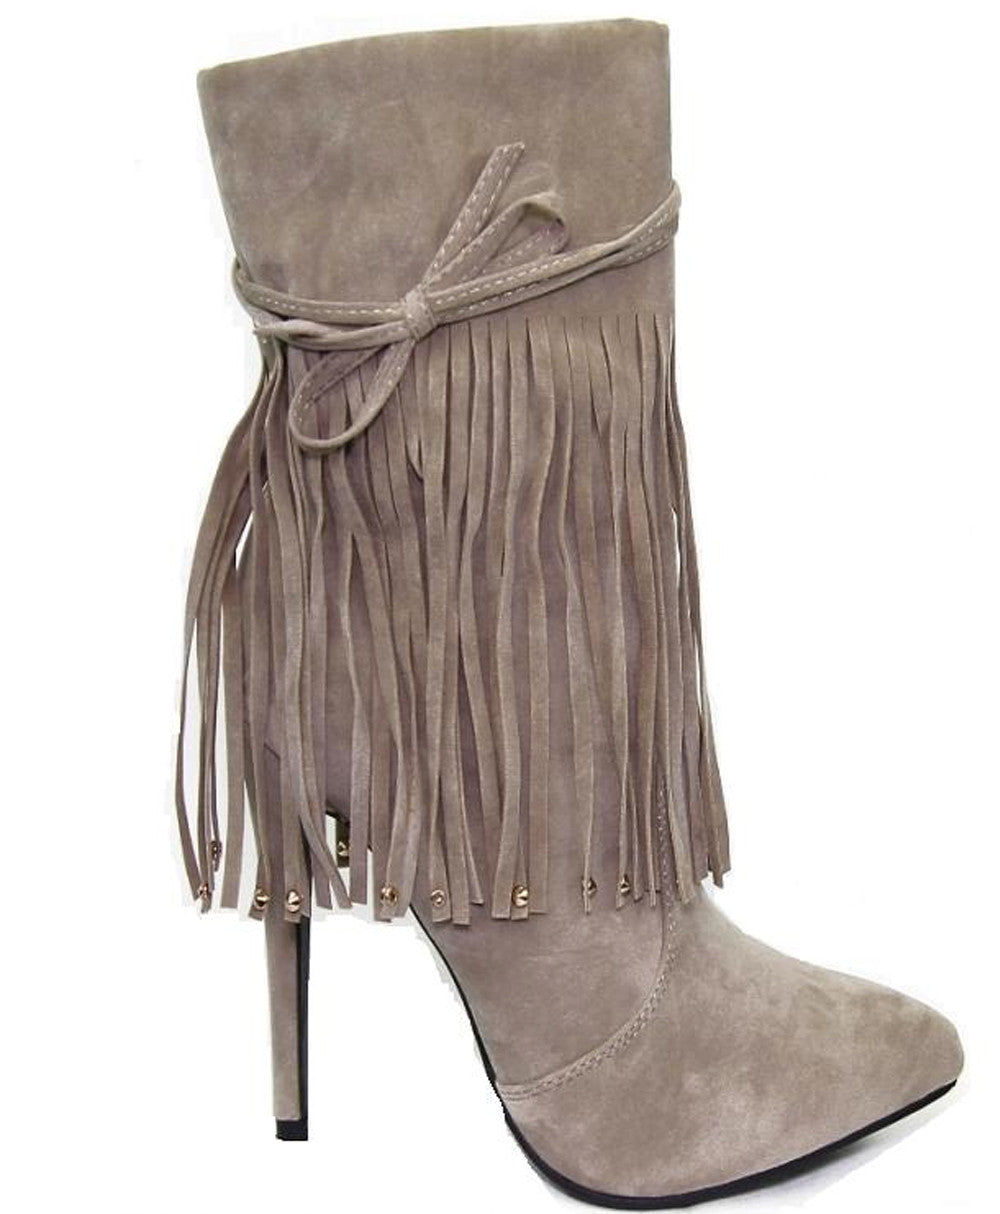 faux suede ankle boots